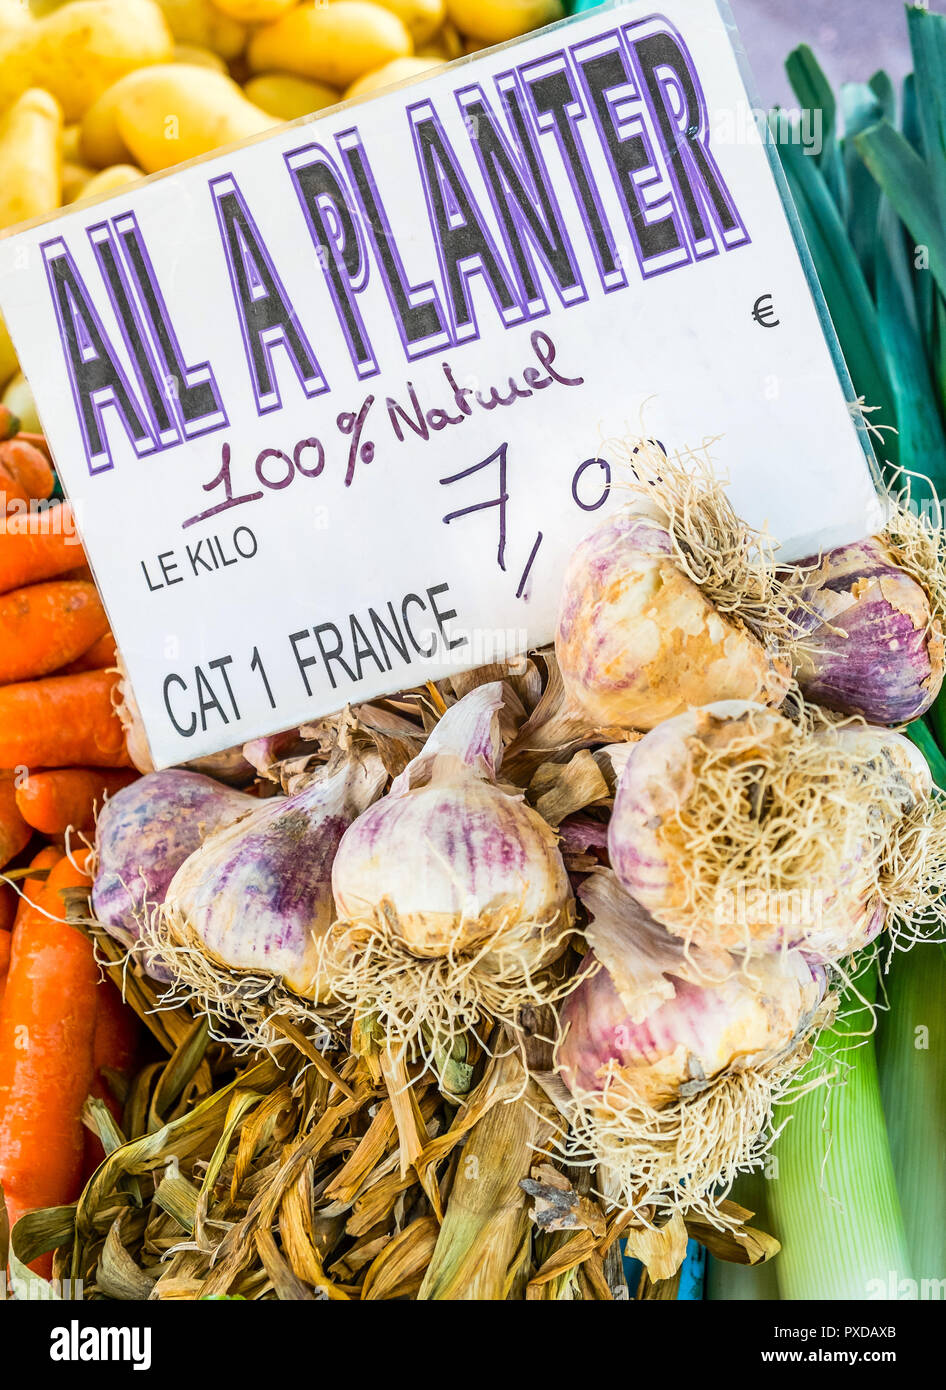 Garlic for planting on French market stall. Stock Photo